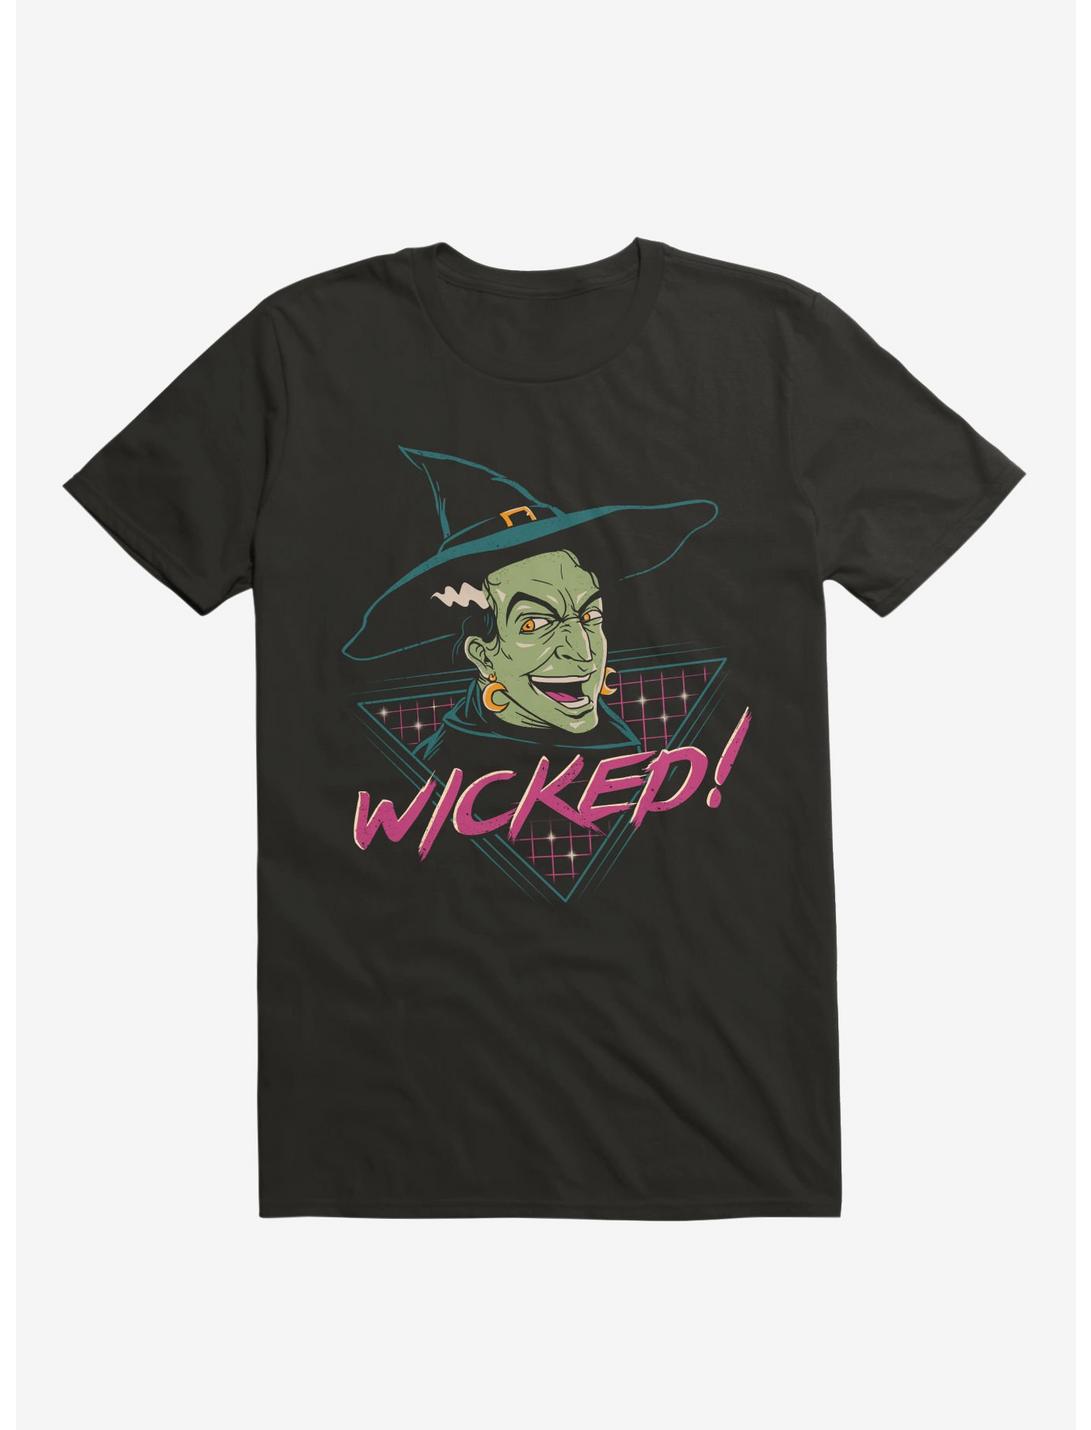 Wicked Witch! Black T-Shirt, BLACK, hi-res